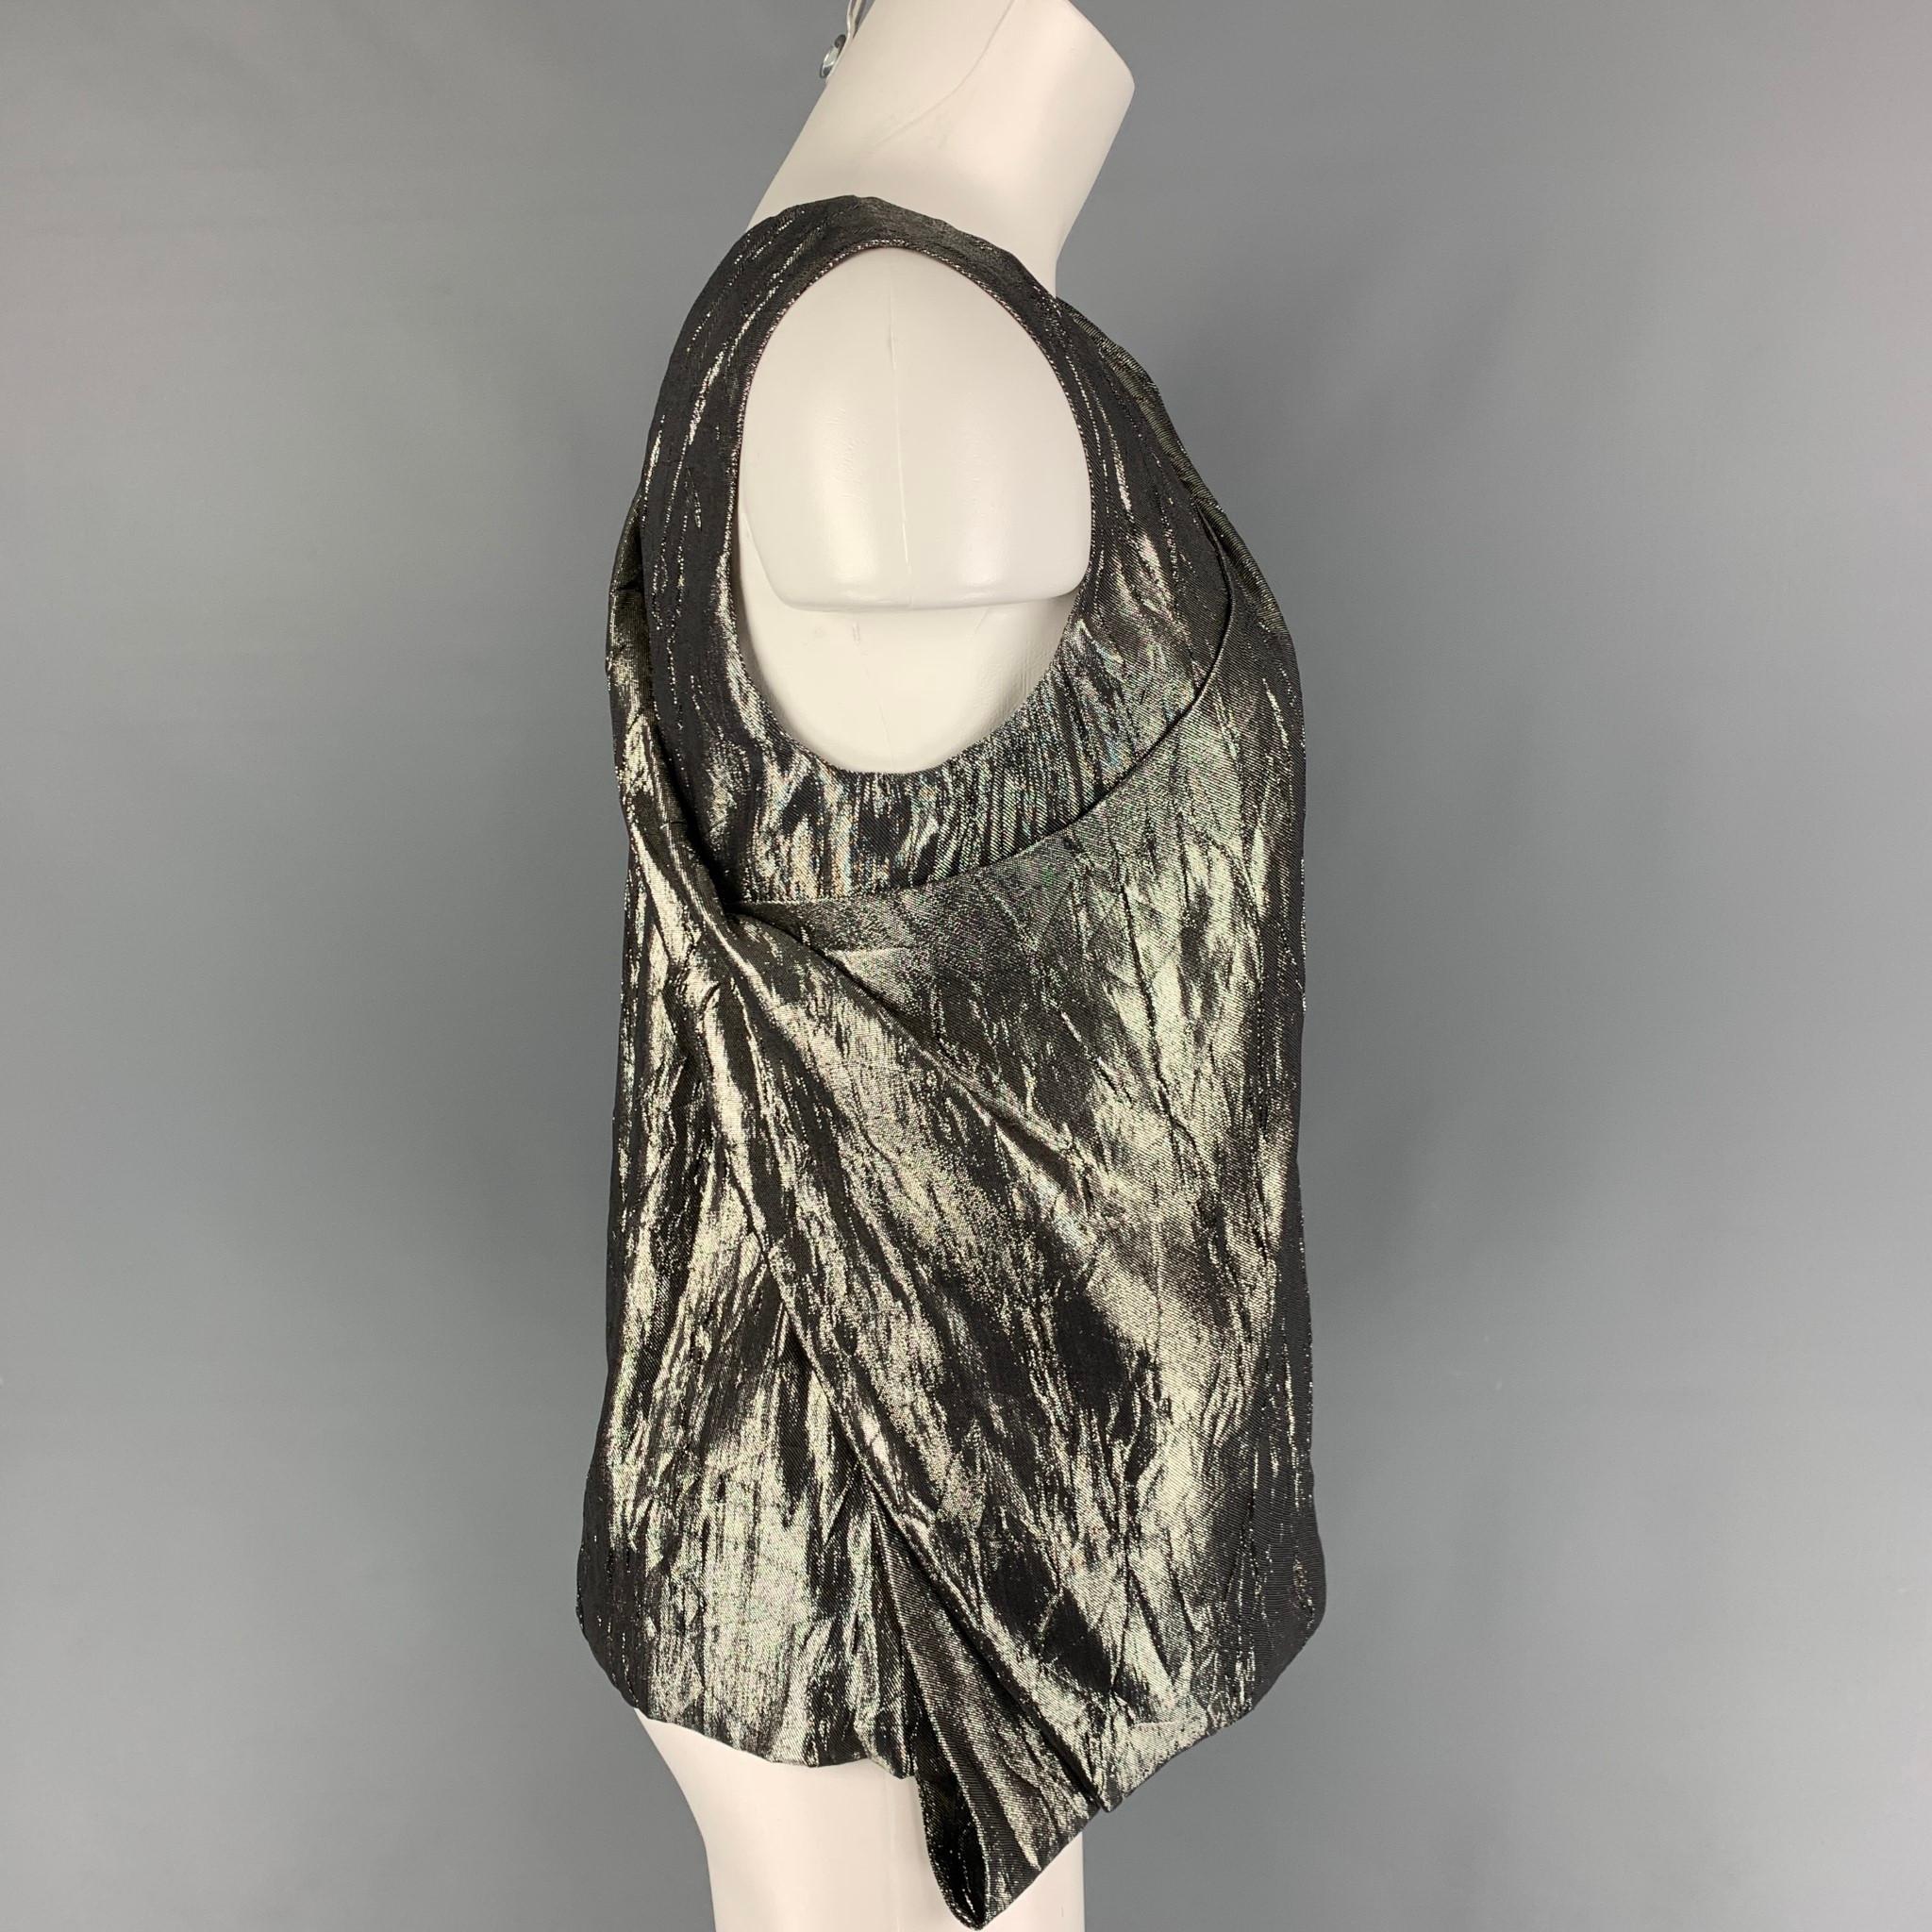 PORTS 1961 dress top comes in a silver silk / polyester featuring a layered asymmetrical design, long length, and a sleeveless style. 

Very Good Pre-Owned Condition.
Marked: 6

Measurements:

Shoulder: 15.5 in.
Bust: 35 in.
Length: 52 in. 